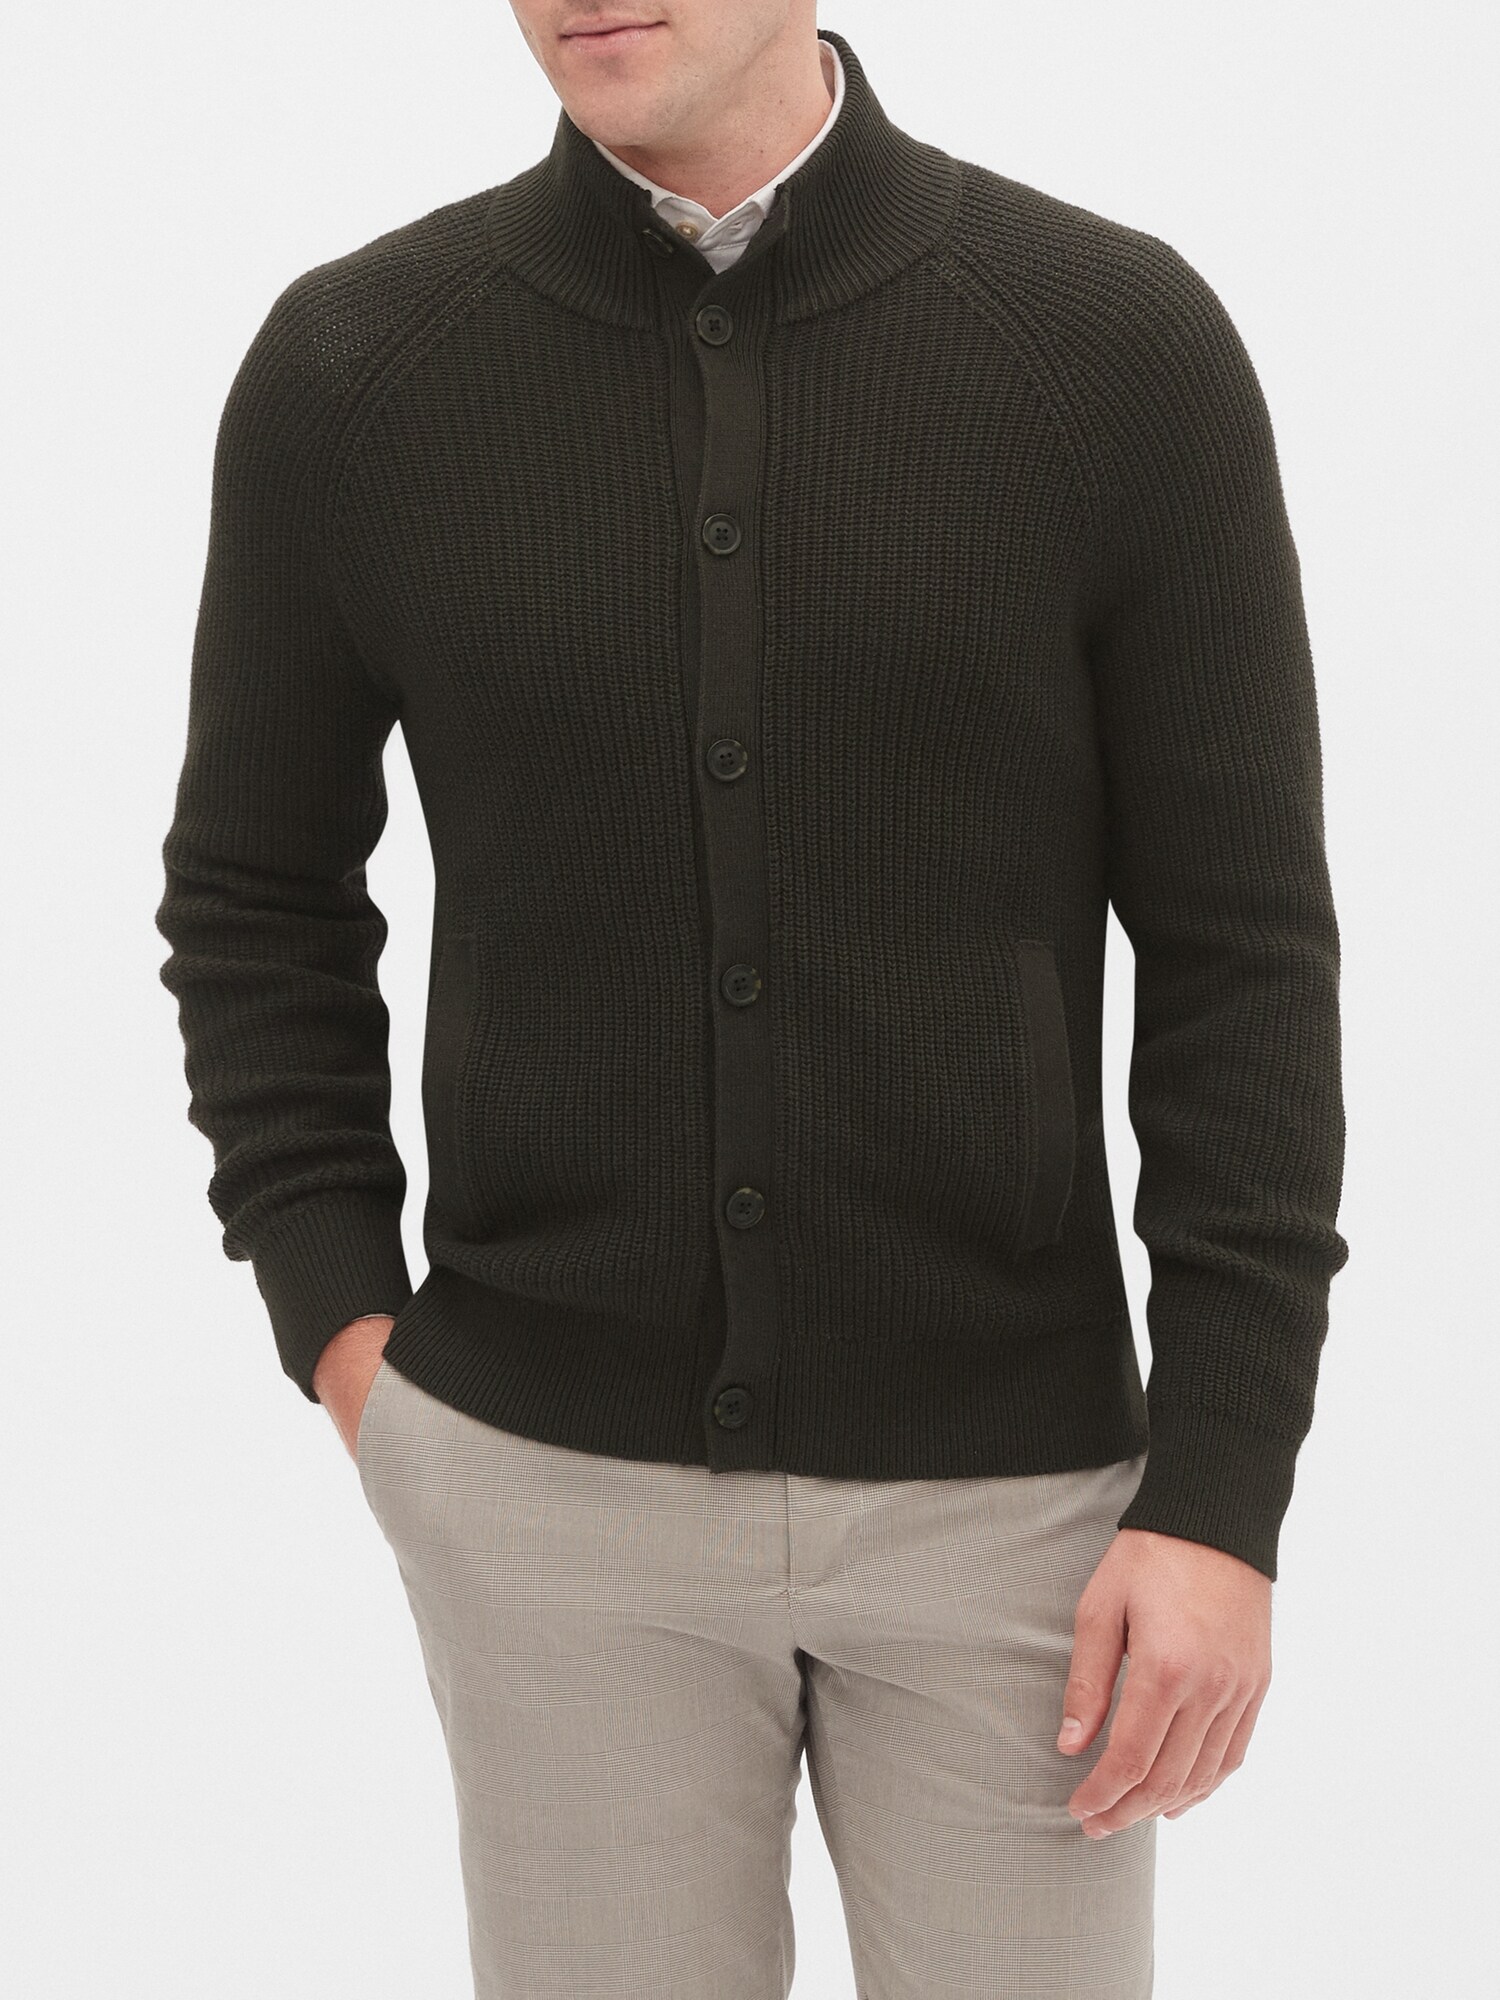 Ribbed Mock-Neck Button Down Jacket